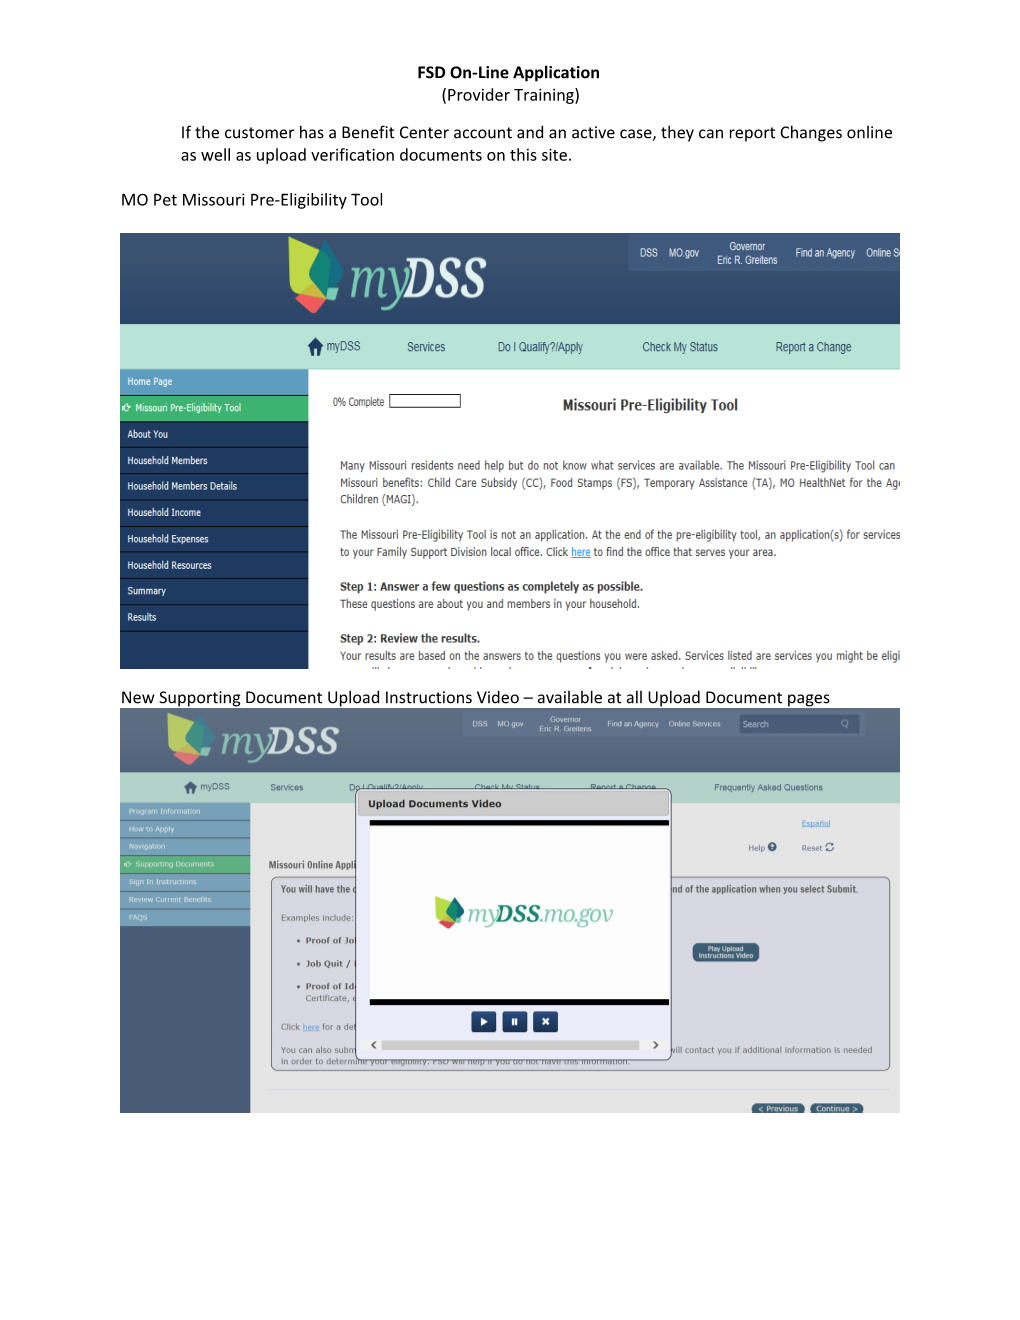 FSD On-Line Application Instructions for Providers